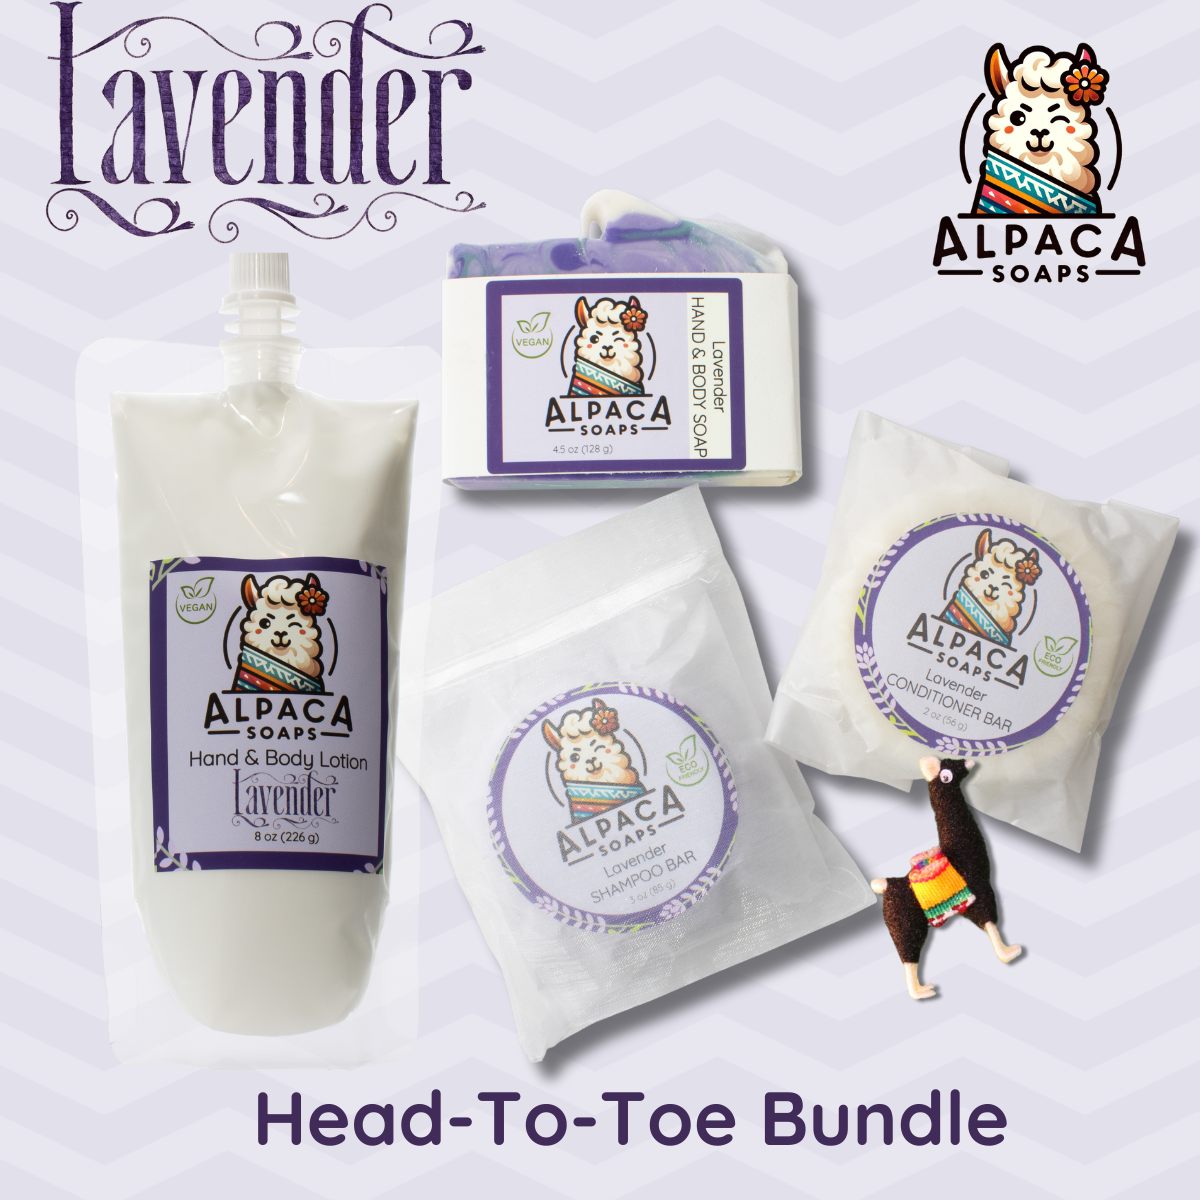 Head to Toe Bundle with shampoo, conditioner bar, soap, lotion and an alpaca key chain. Flat lay on a lavender background